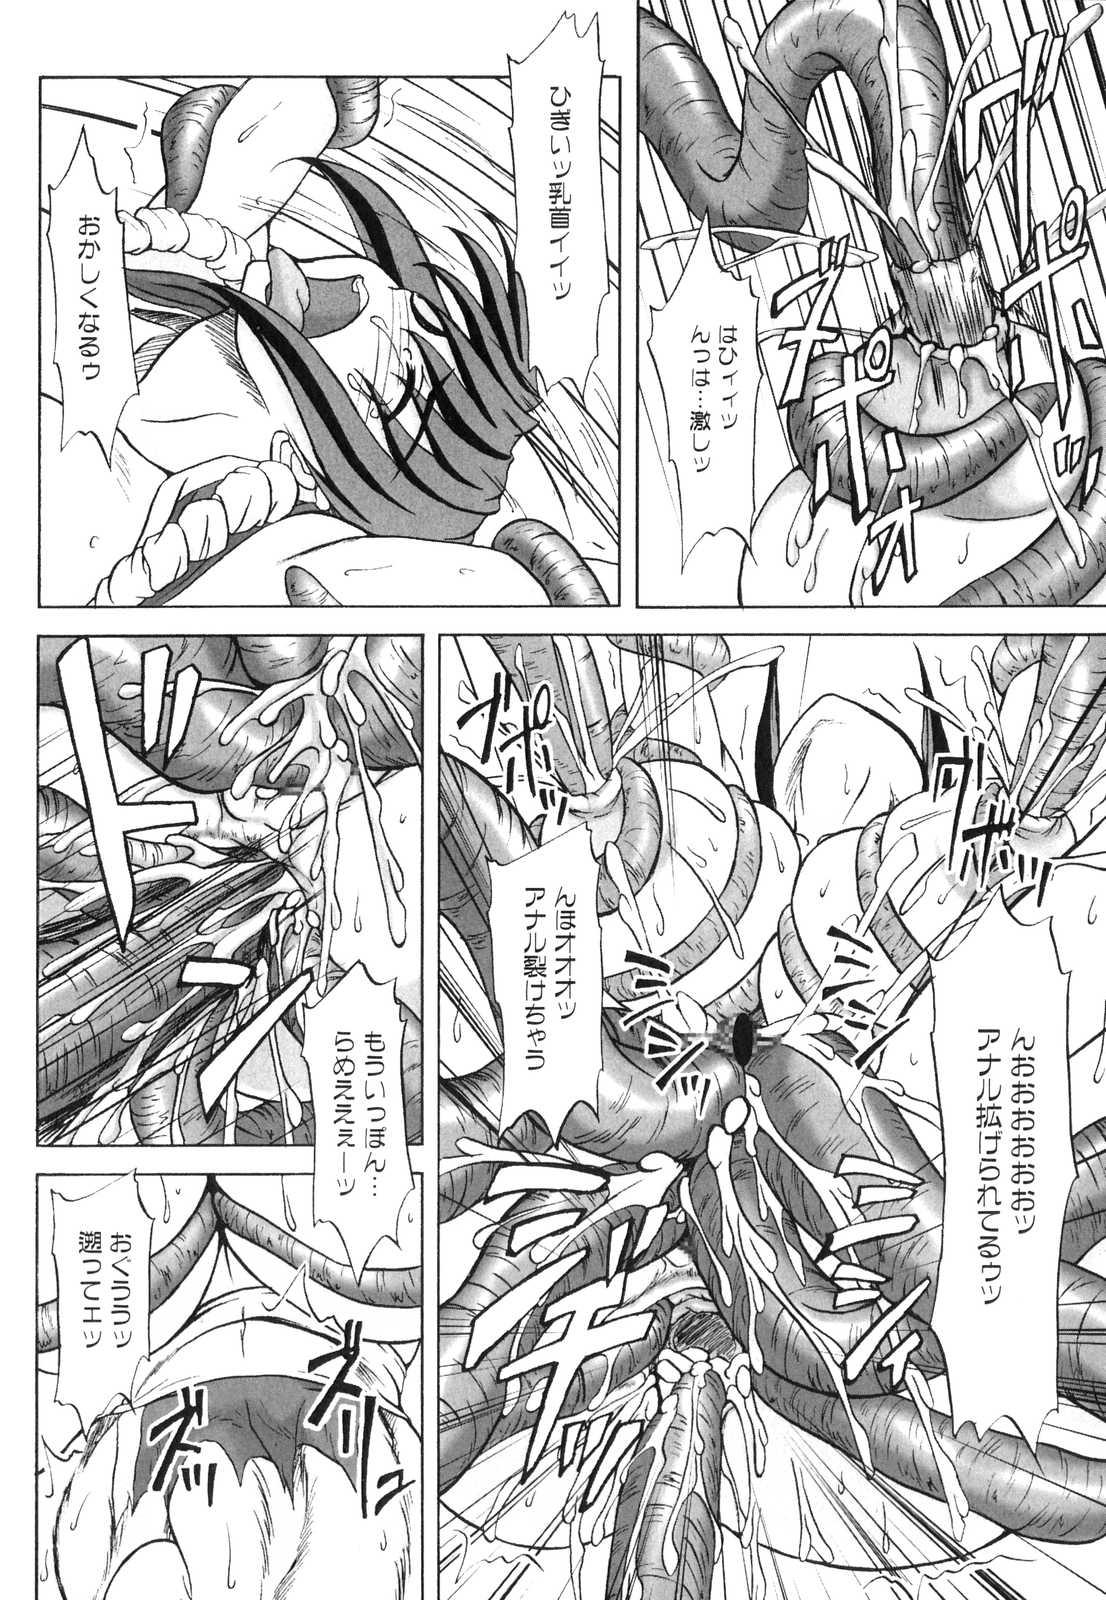 Mars Impact Page 26 Of 30 king of fighters hentai manga, Mars Impact Page 2...